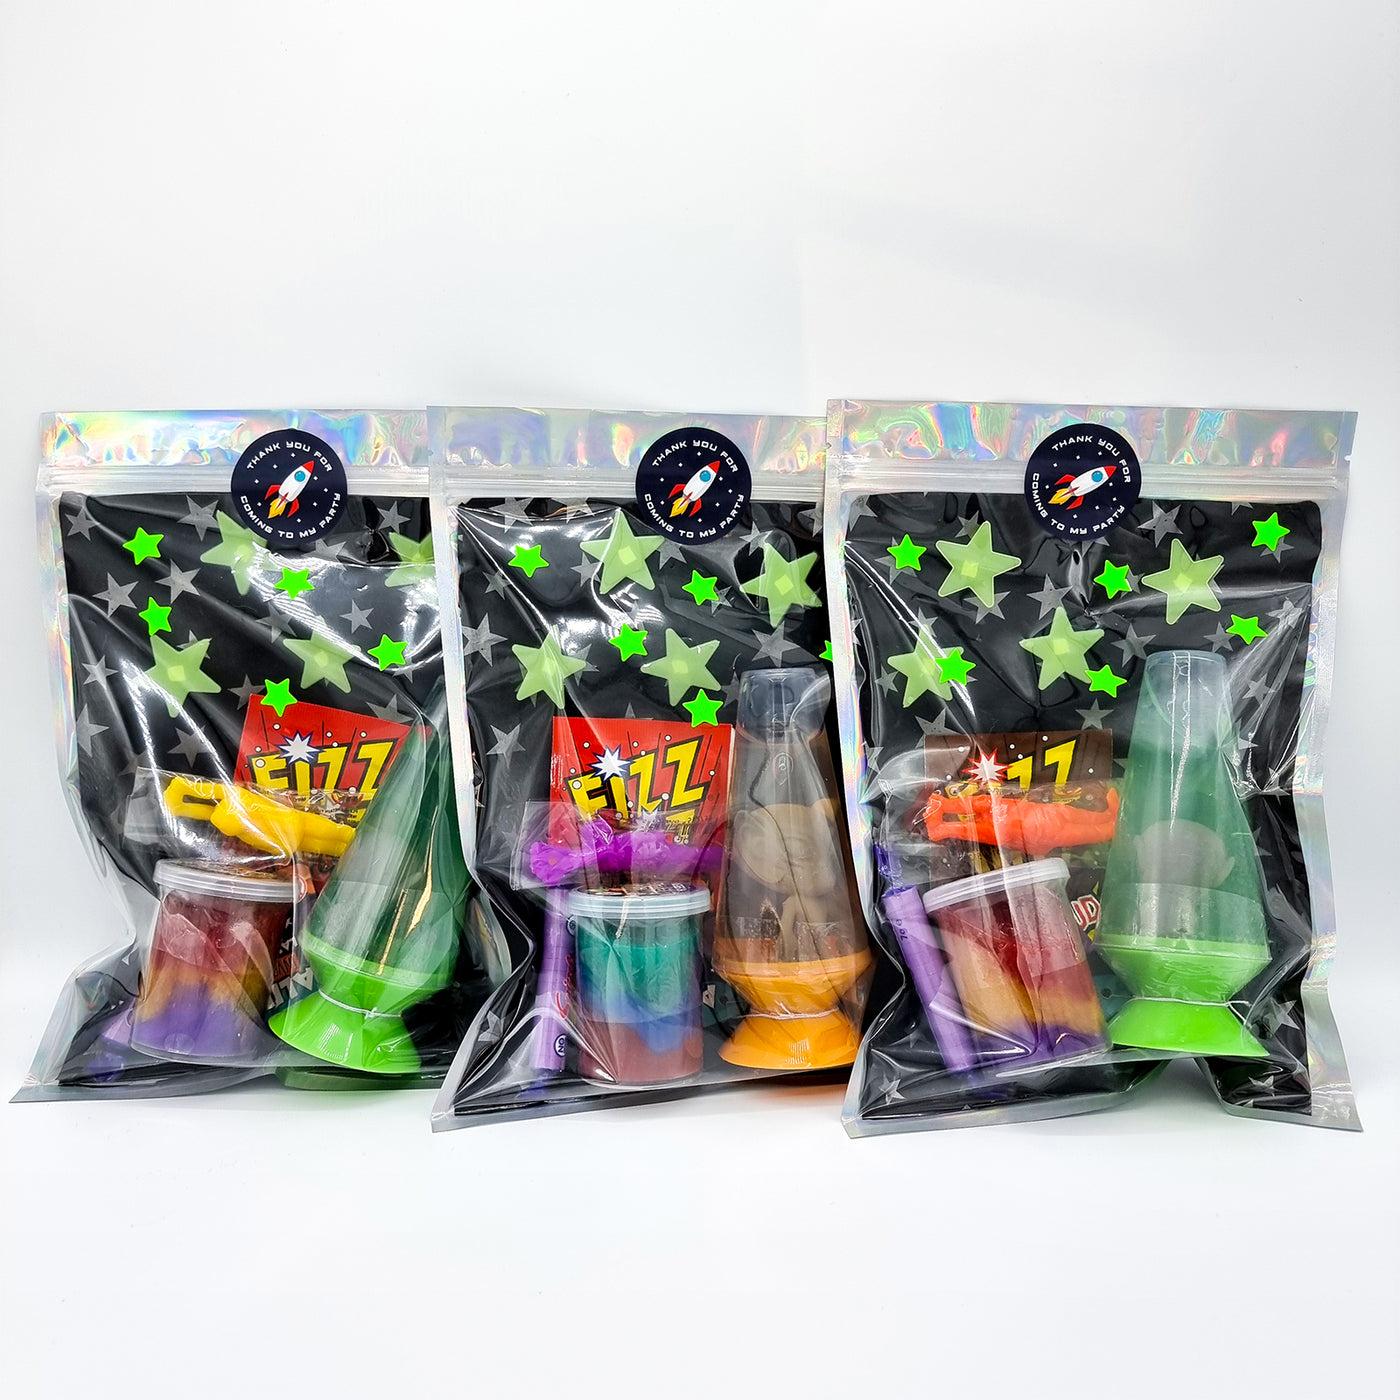 Galaxy Astronaut Alien Space Pre Filled Party Bags, Rocket Space Goodie Bags For Children With Alien Slime, Toys And Sweets. Party favours for children.